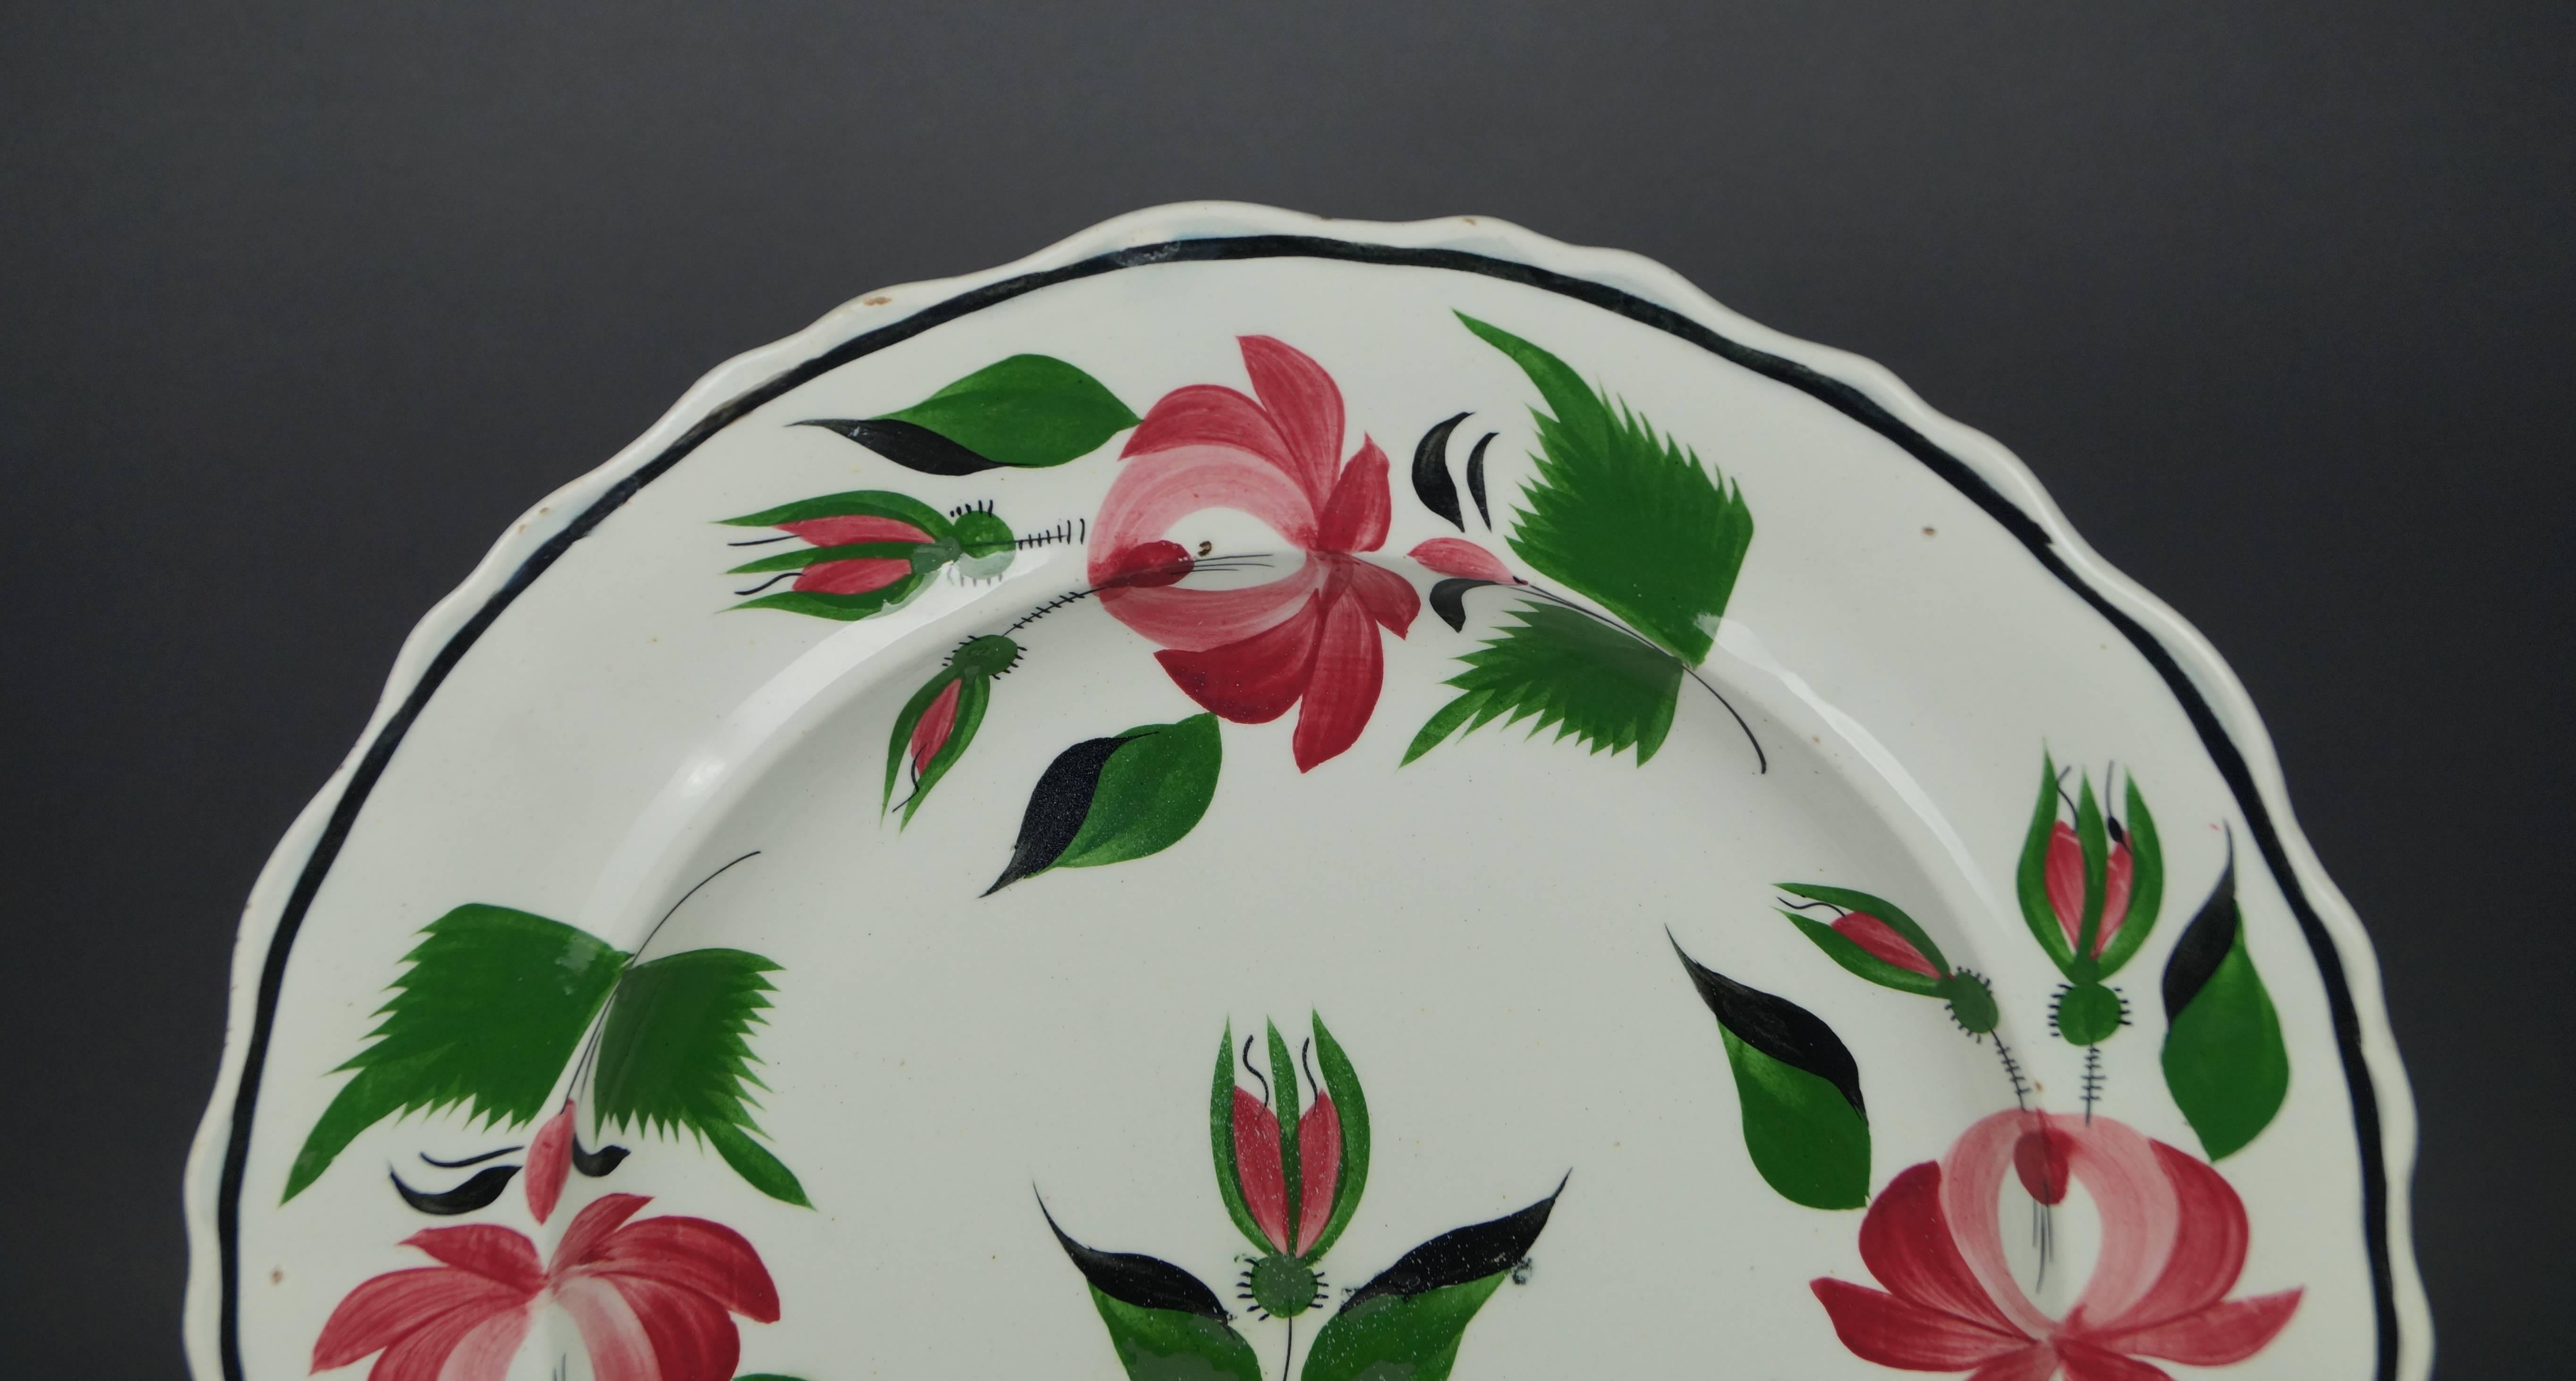 This traditional English creamware plate was produced in the early 19th century. It was produced in Staffordshire, England by William Adams circa 1815. The hand-painted Rose pattern features vibrant pink, green and unusual black decoration to the